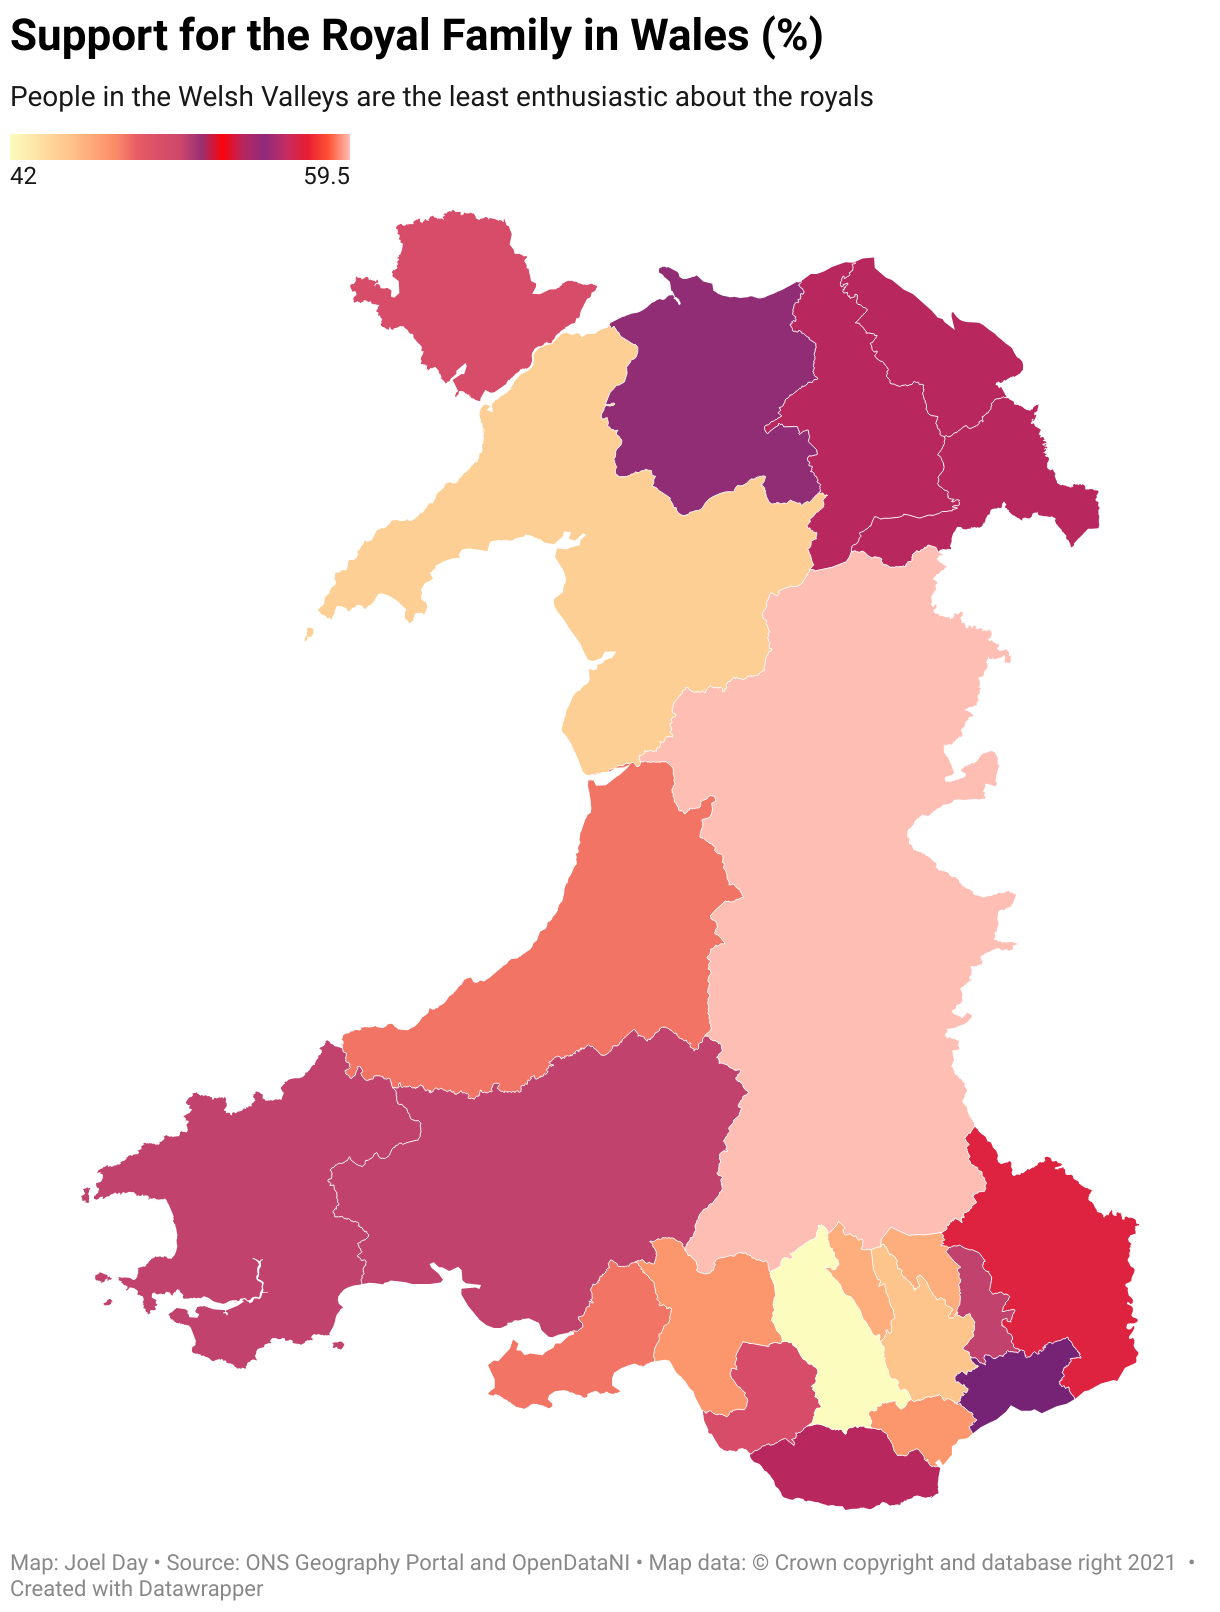 A map showing the percentages of people across Wales who support the Royal Family